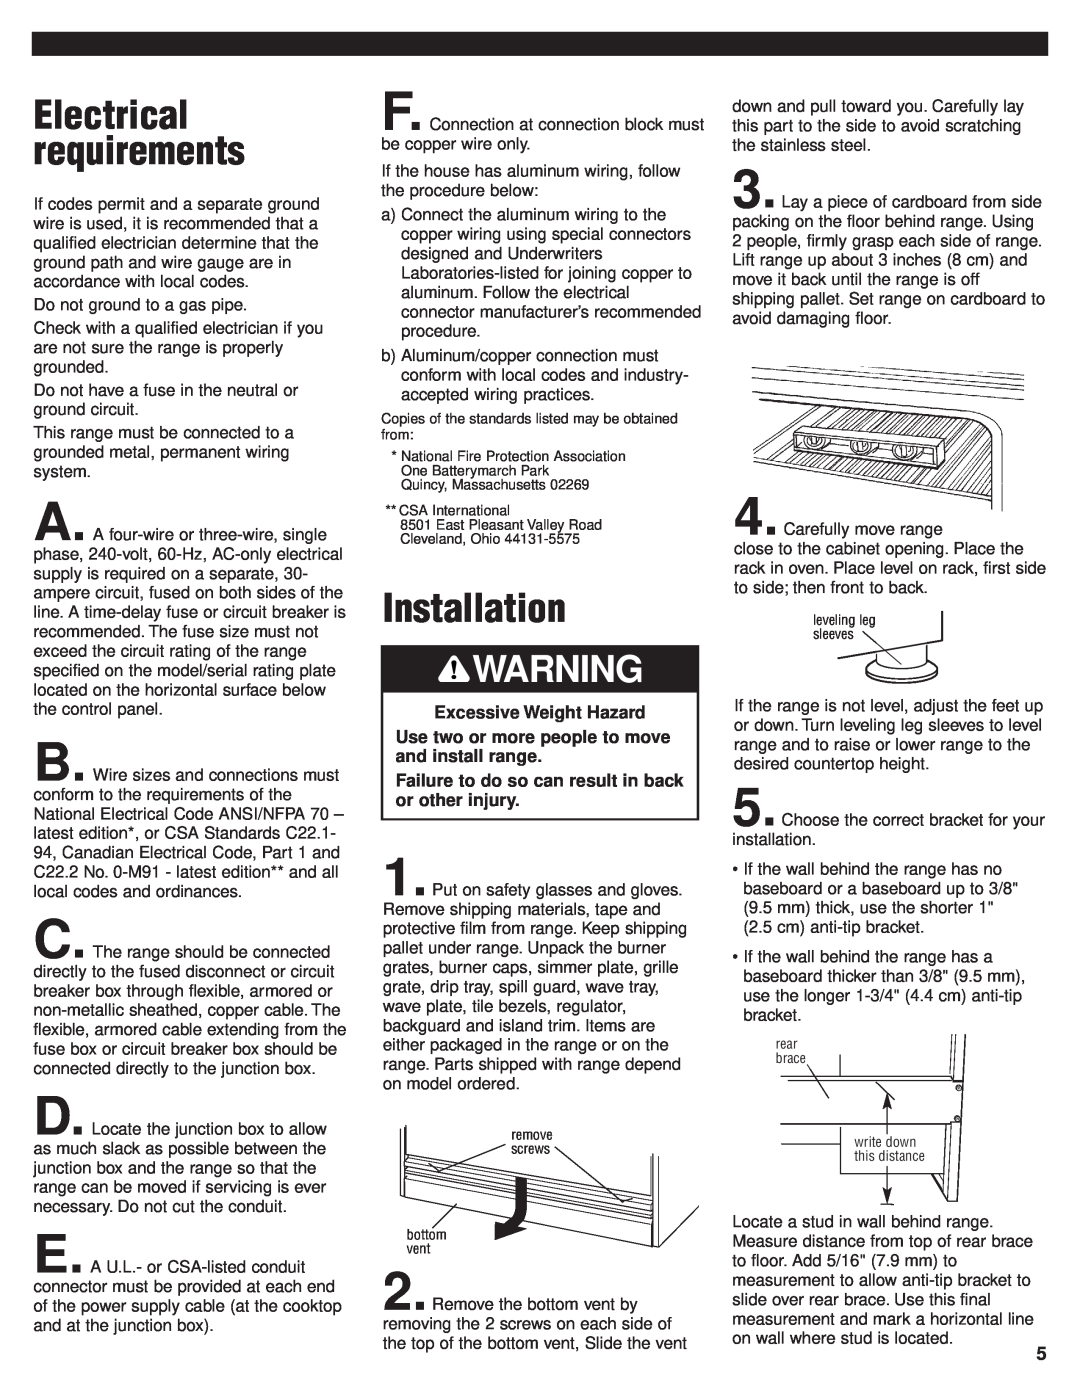 KitchenAid 8301169 installation instructions Installation, Electrical requirements 